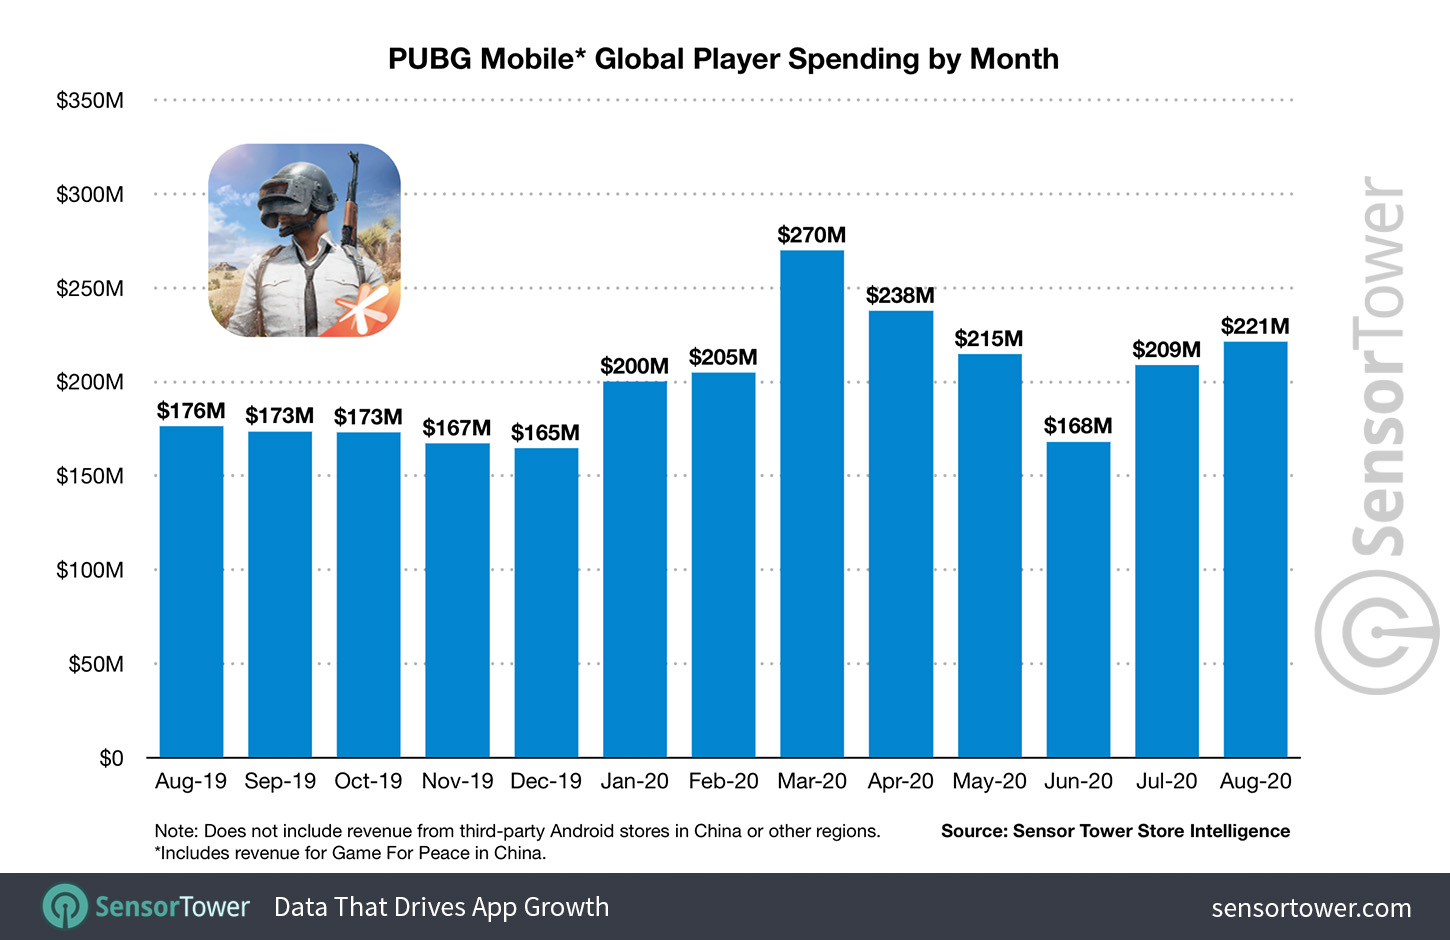 PUBG Mobile Global Player Spending by Month Jan to Aug 2020